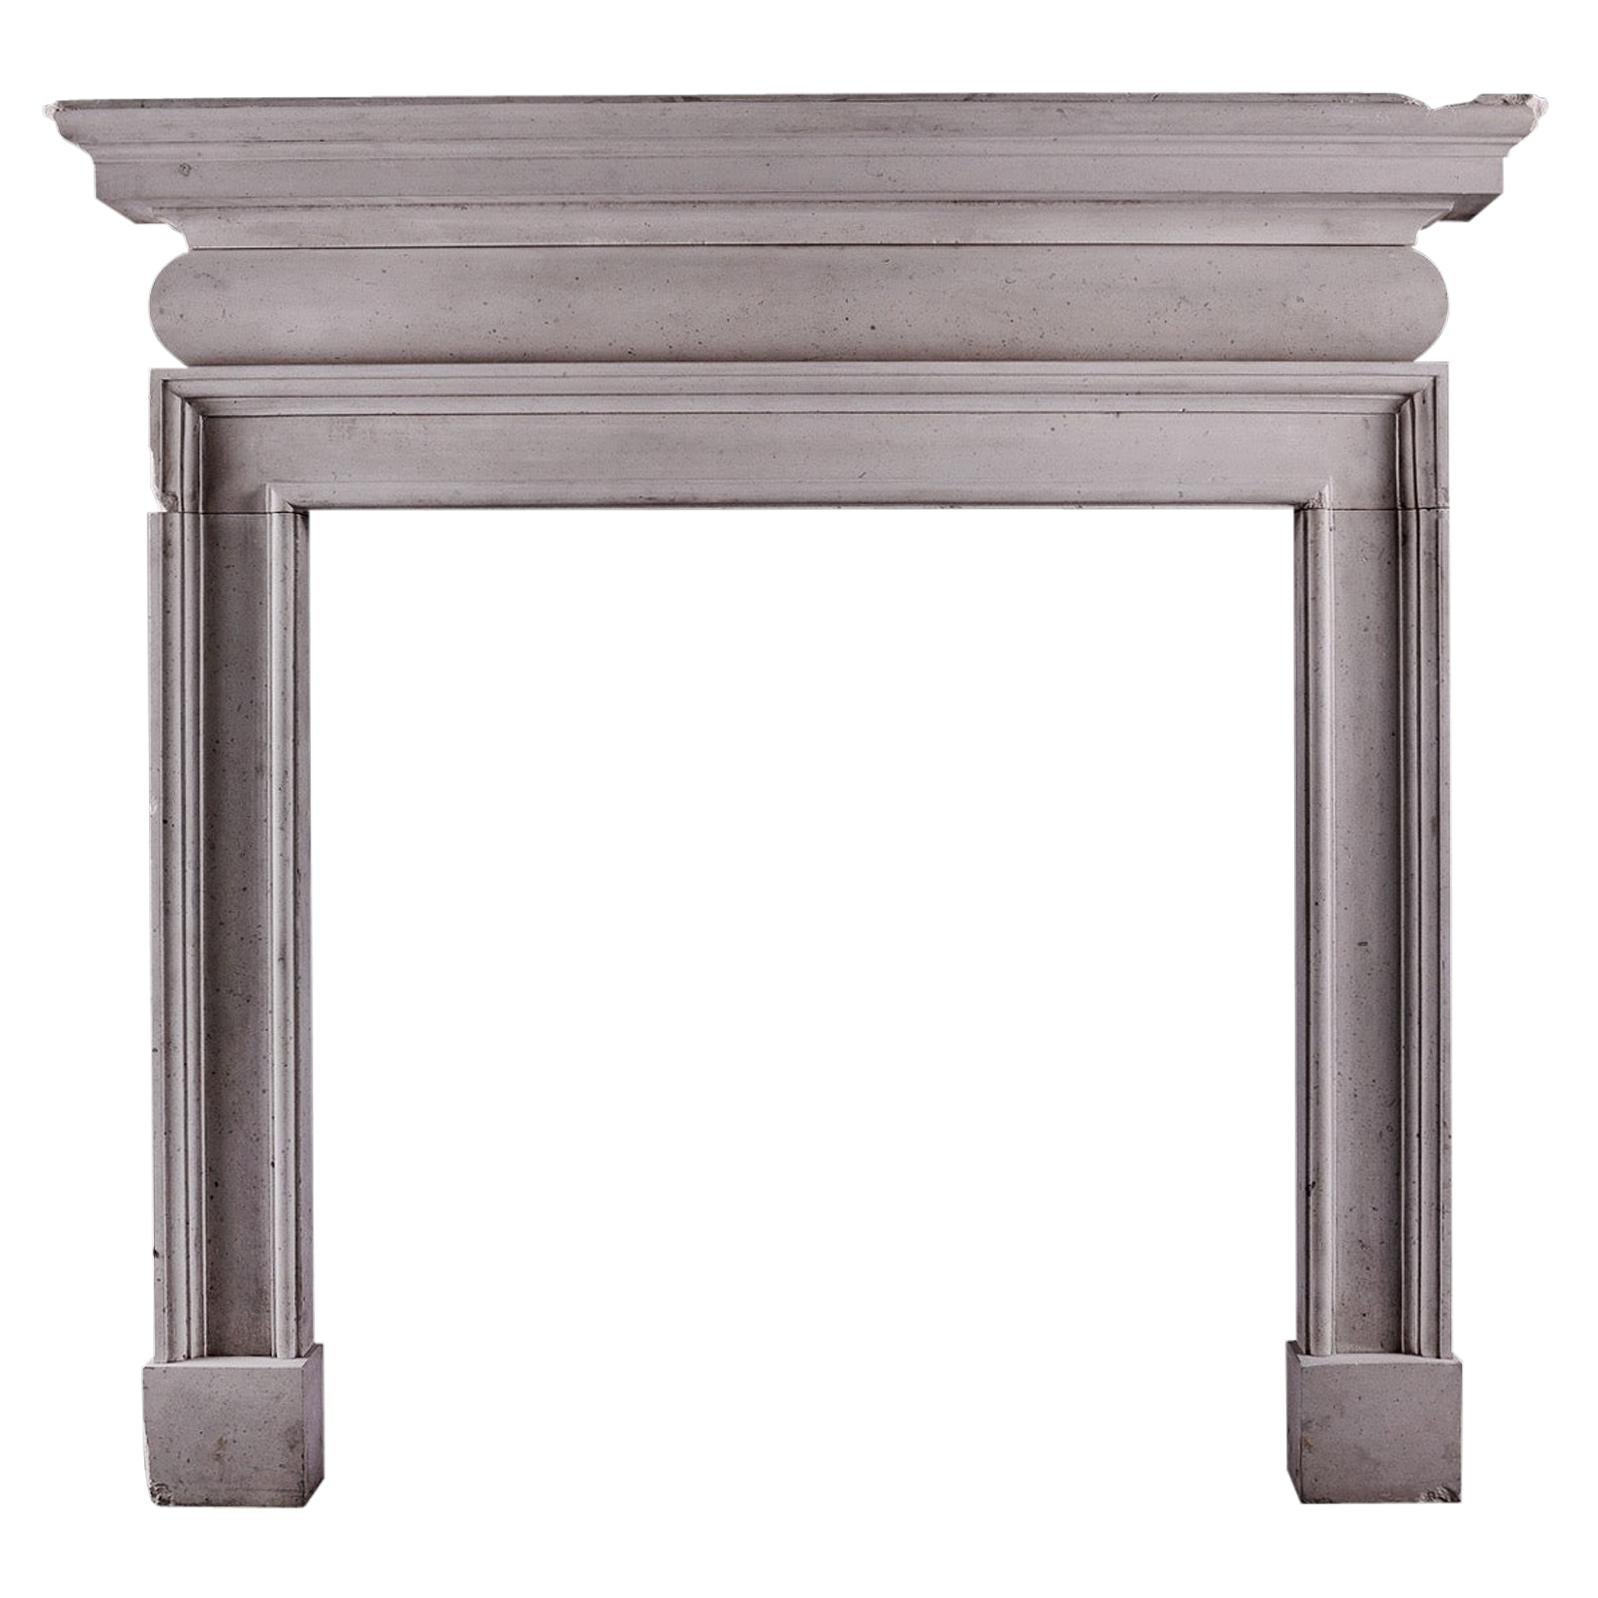 An English Limestone Fireplace In The Georgian Style For Sale